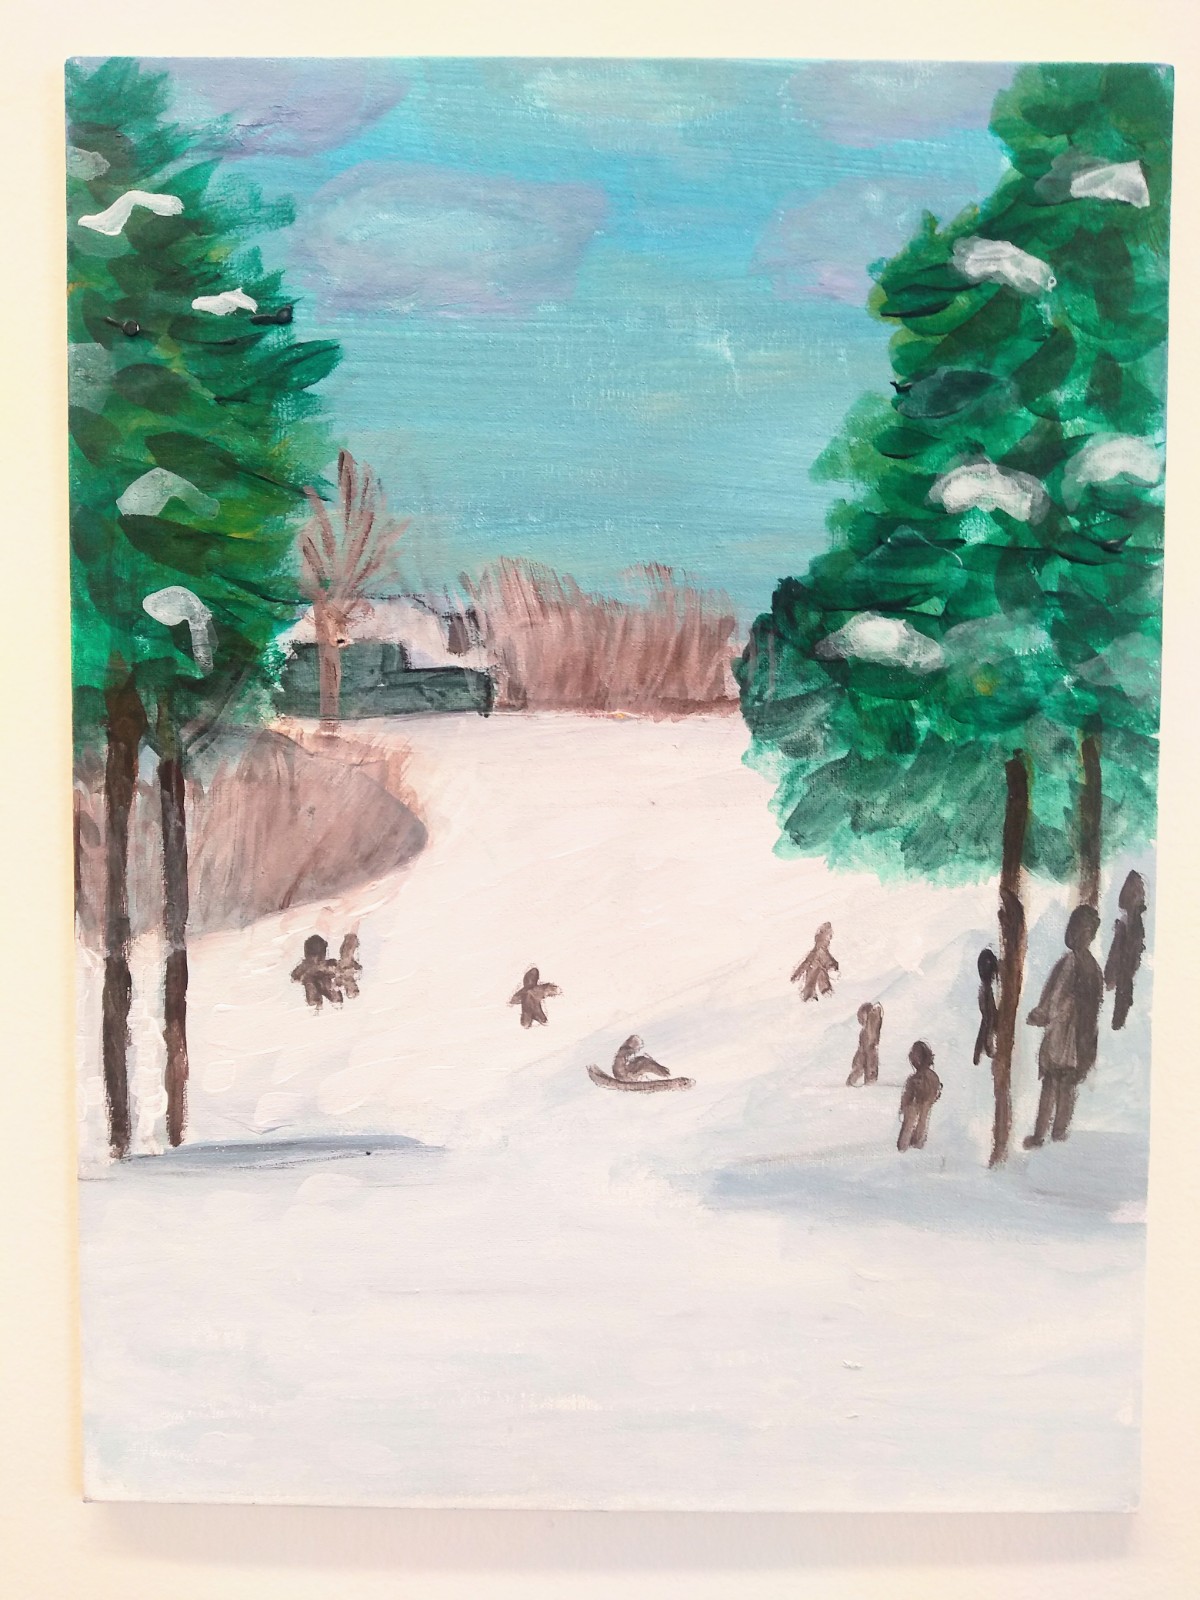 A portrait of people playing in the snow with two trees on each side.